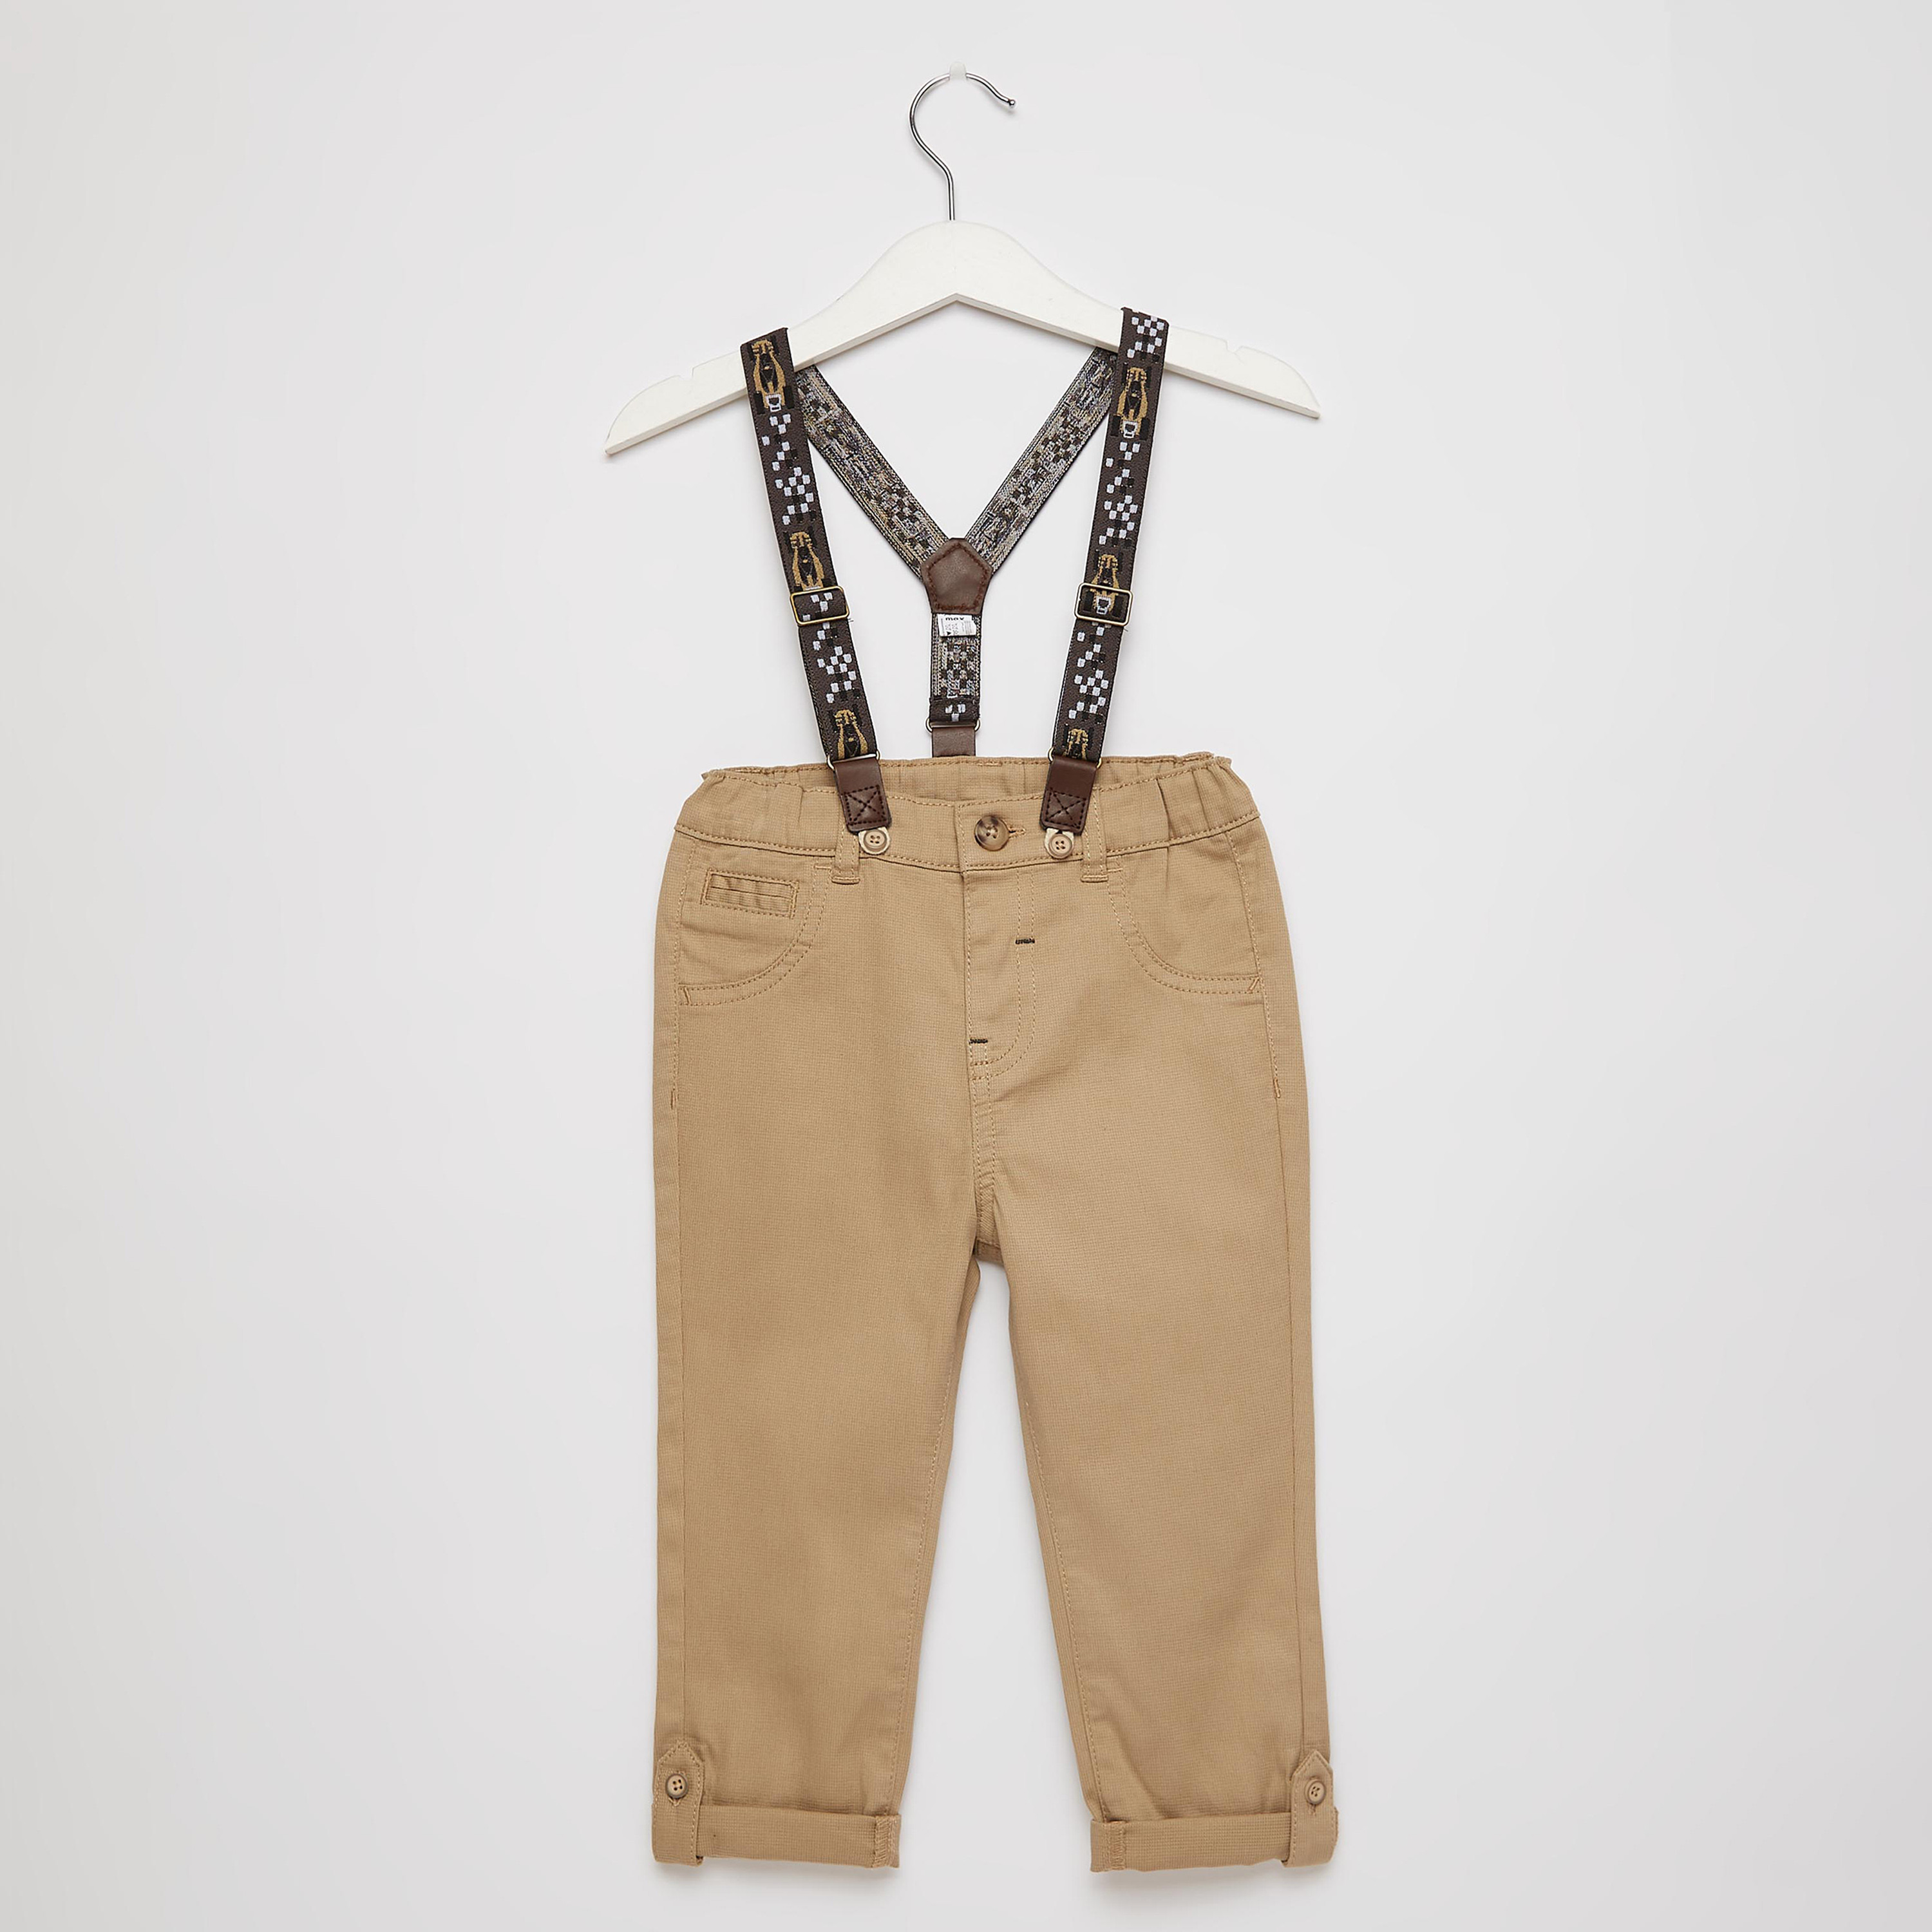 Buy Off White Trousers & Pants for Boys by TALES & STORIES Online | Ajio.com